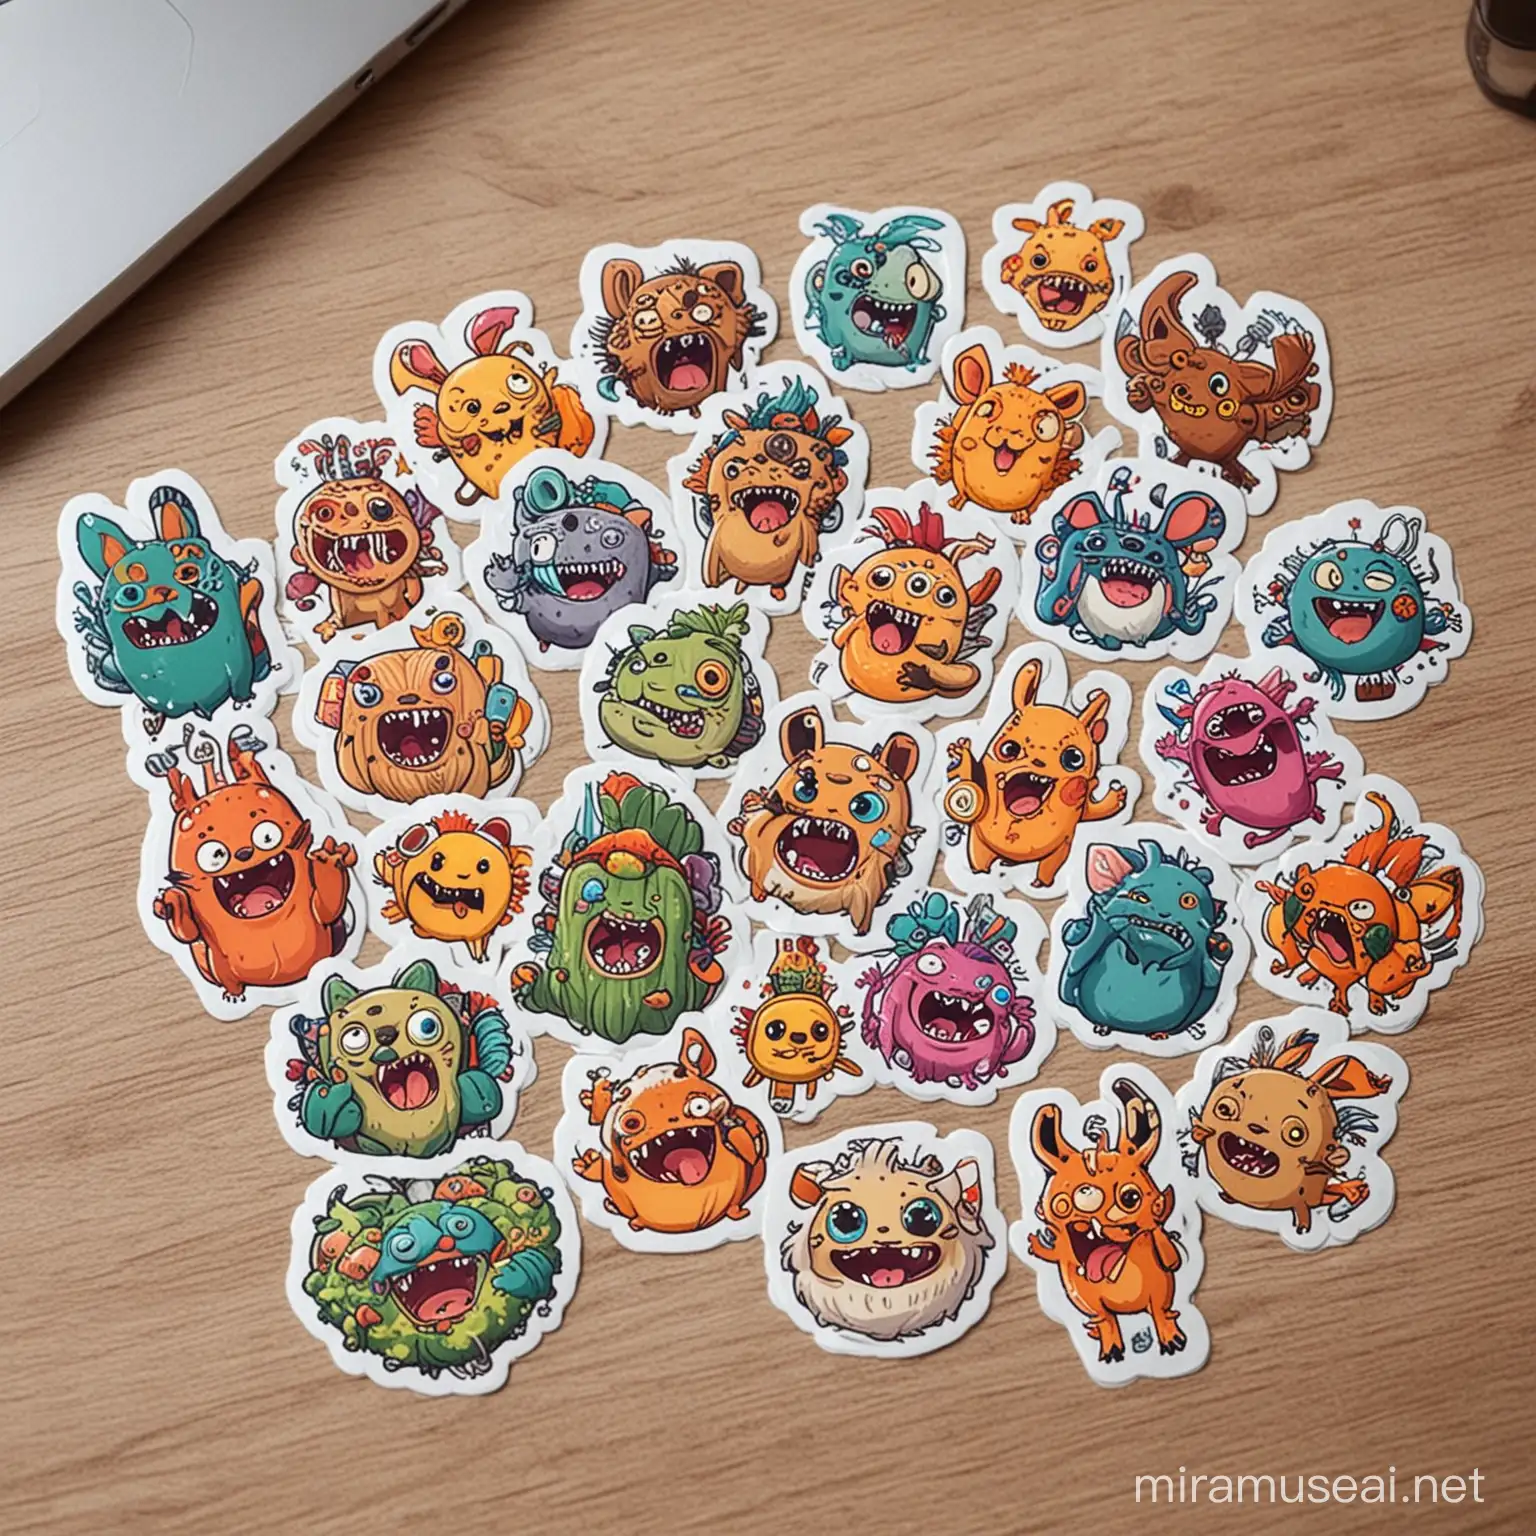 Colorful Funny Creature Stickers for Playful Expression